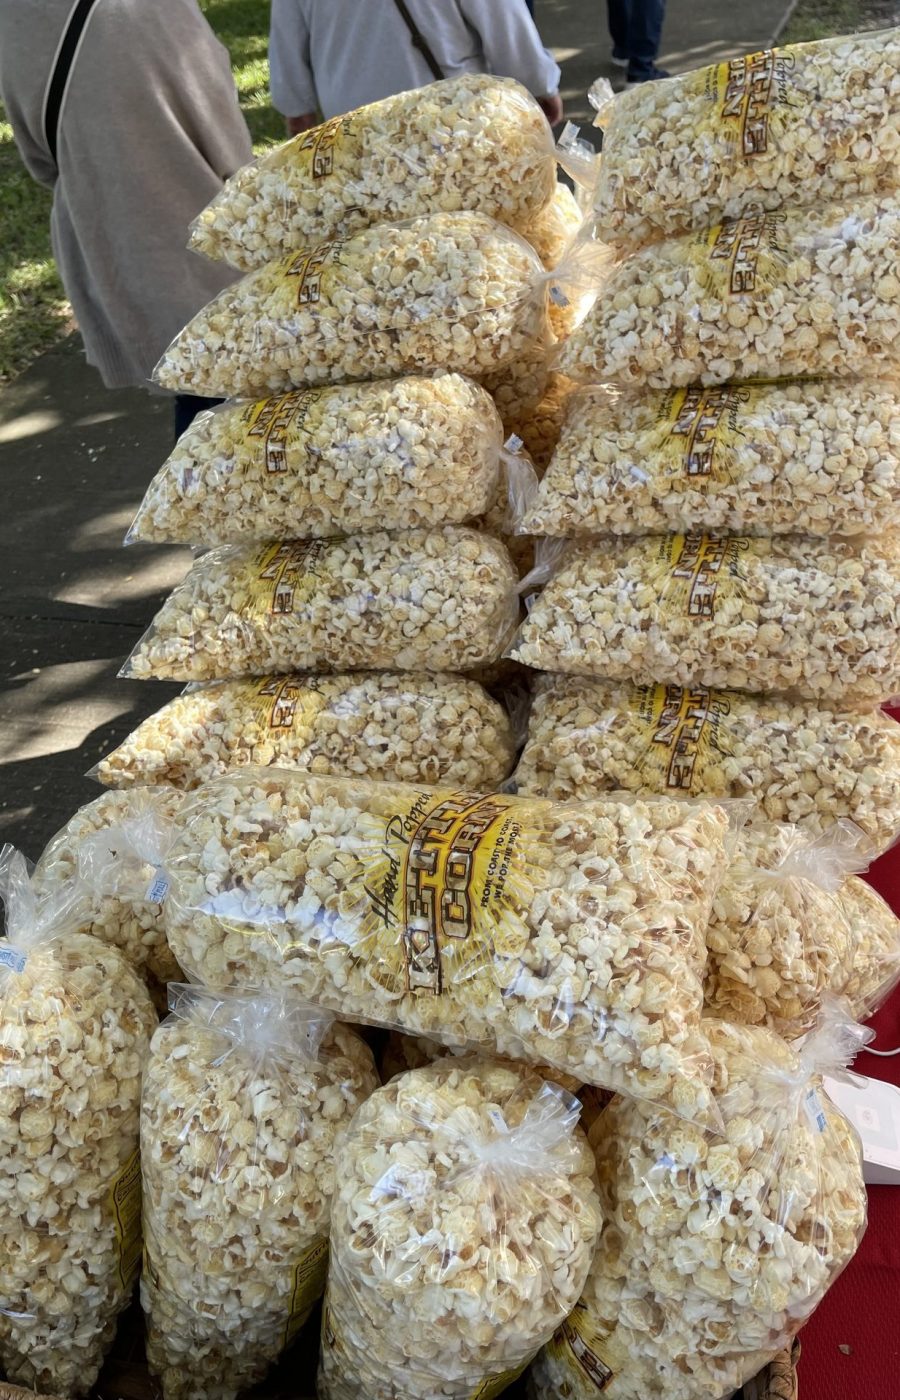 Pile of popcorn in clear bags